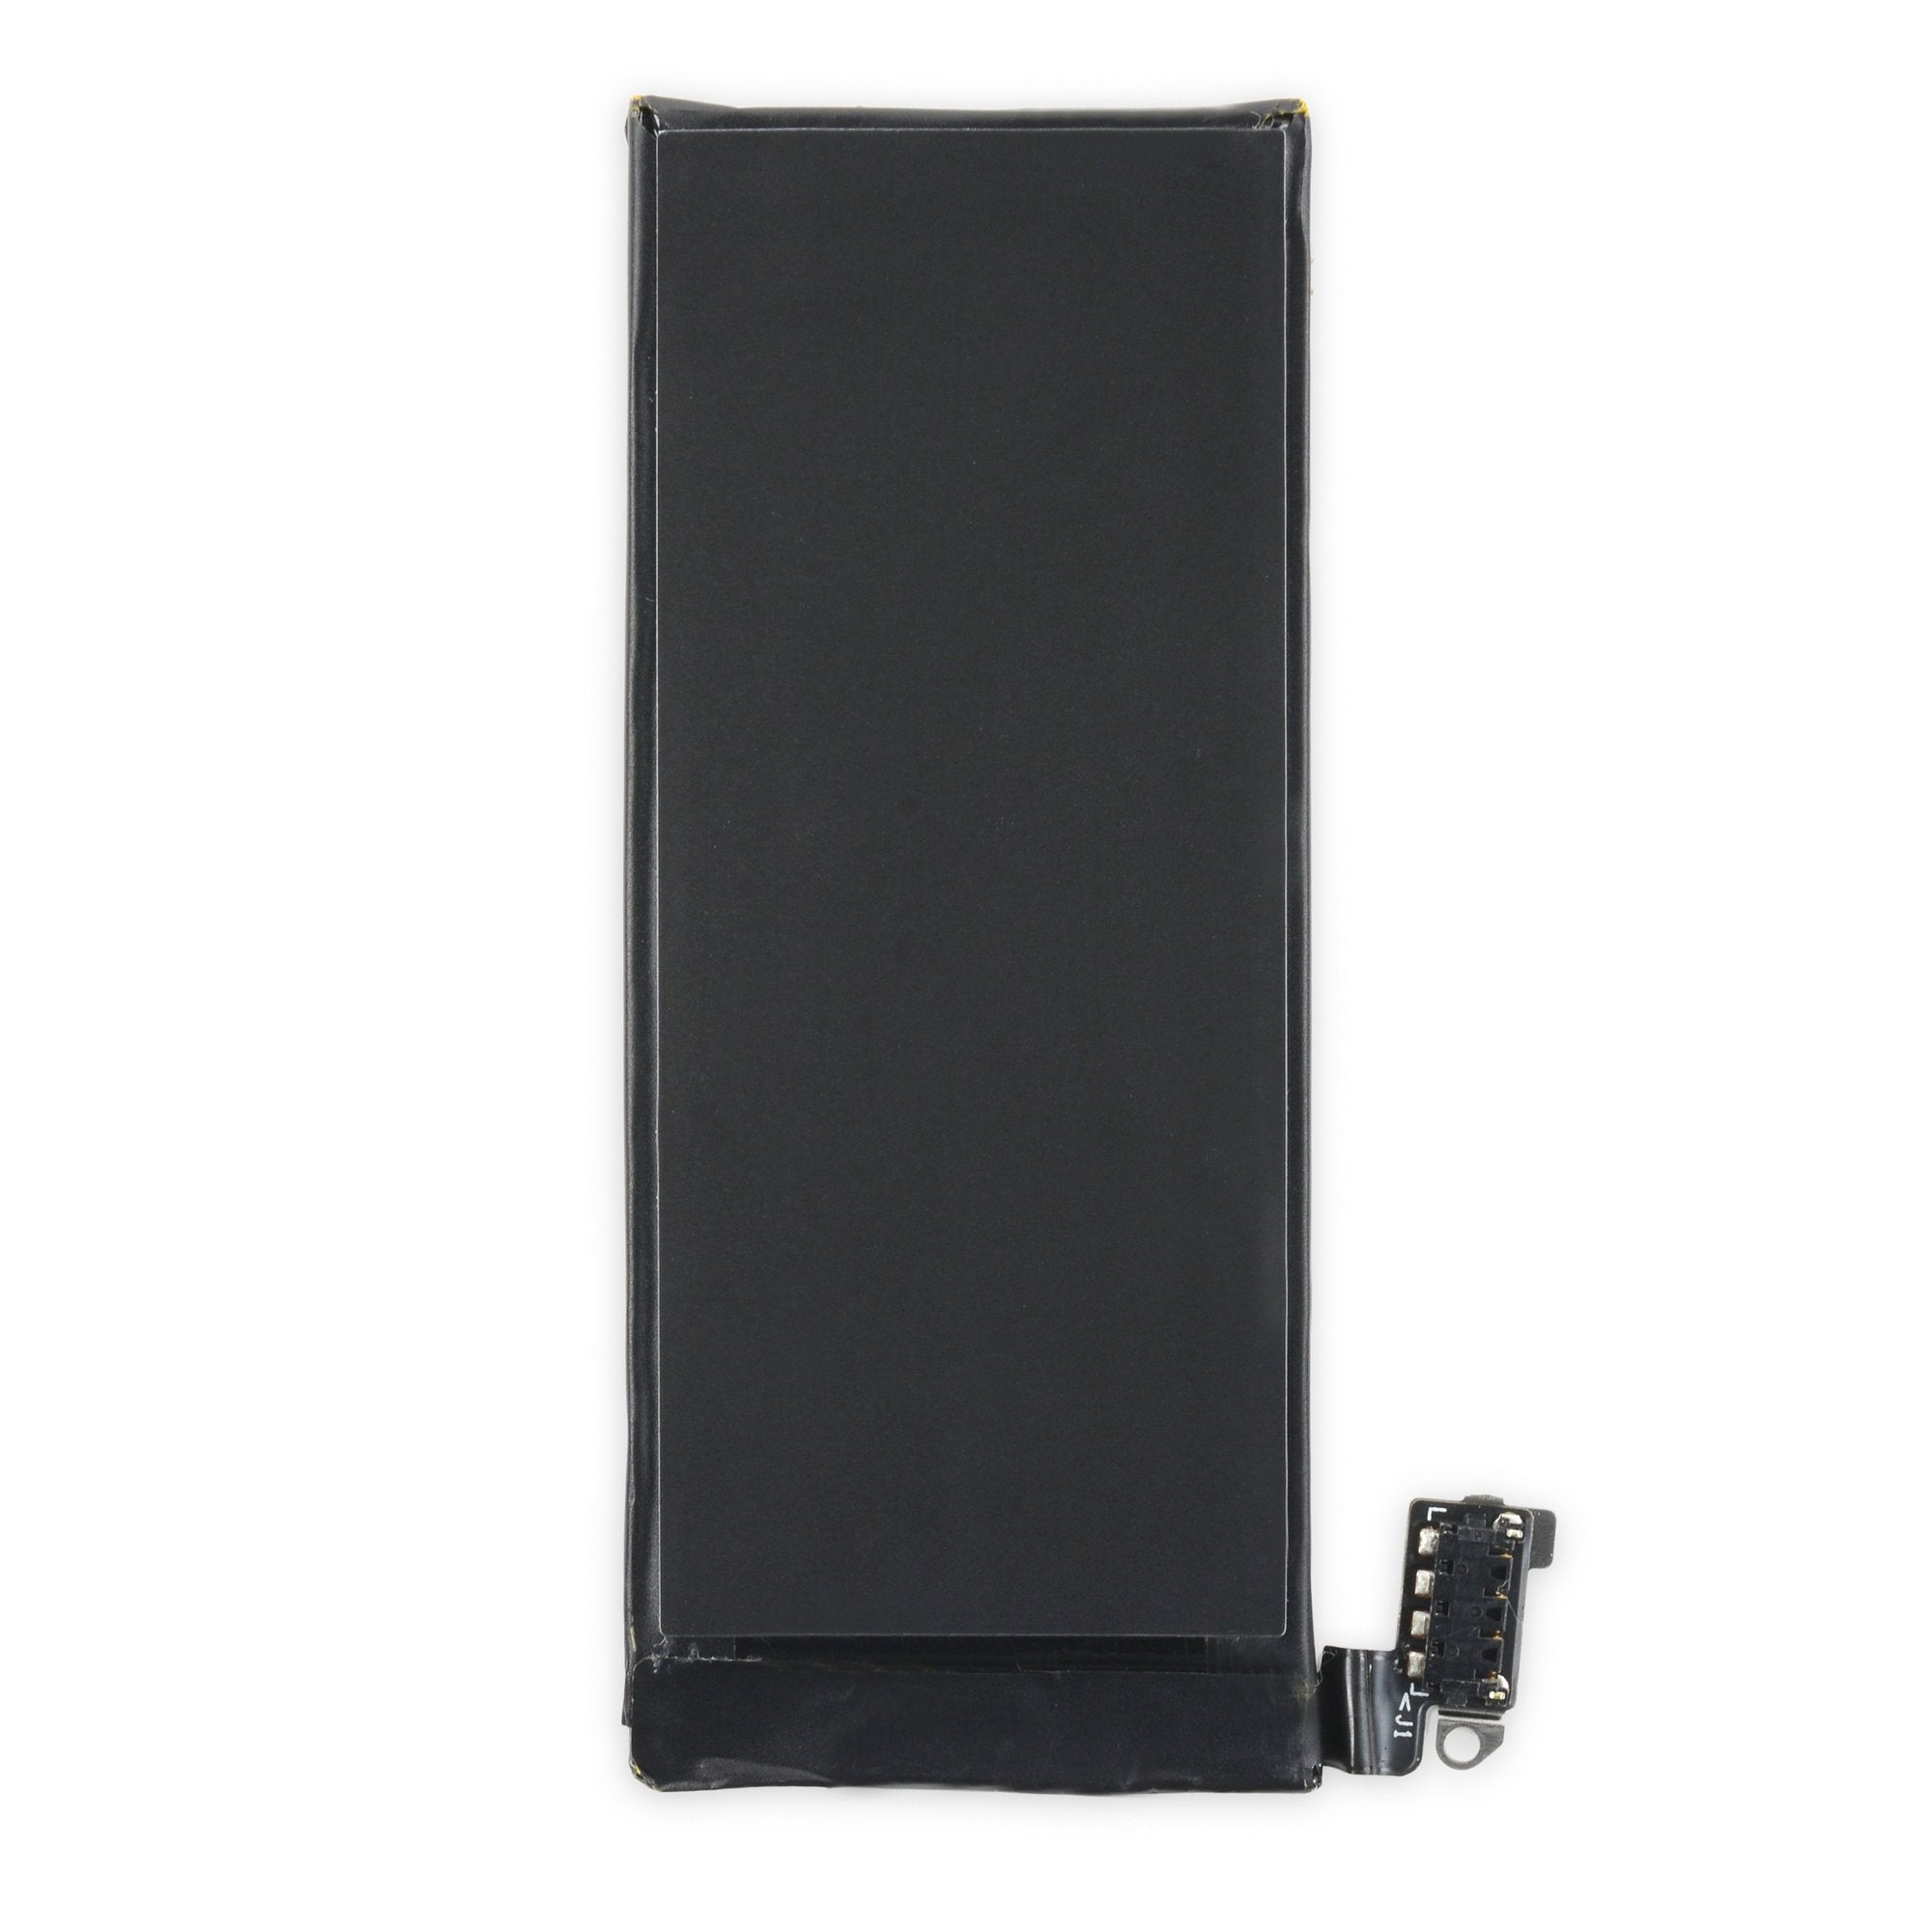 iPhone 4 Battery New Part Only